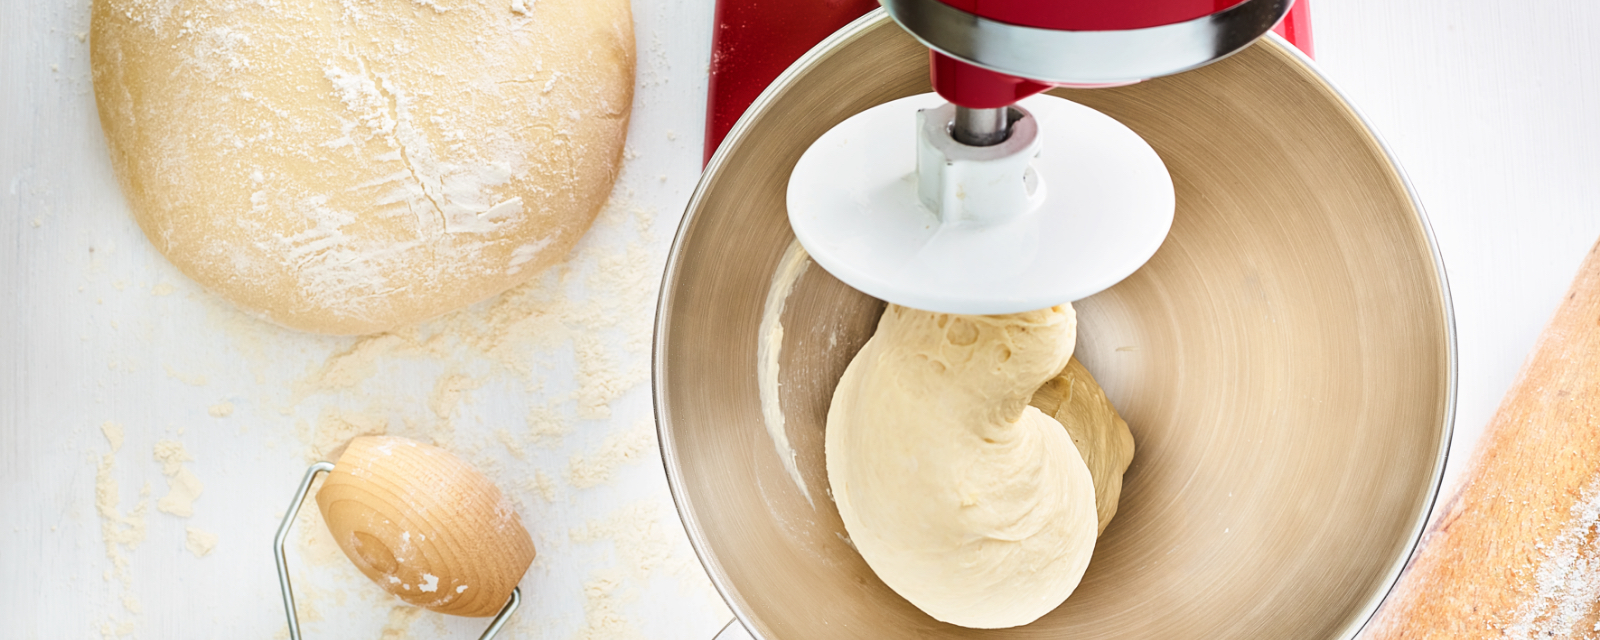 Red mixer kneading dough to make yeast bread